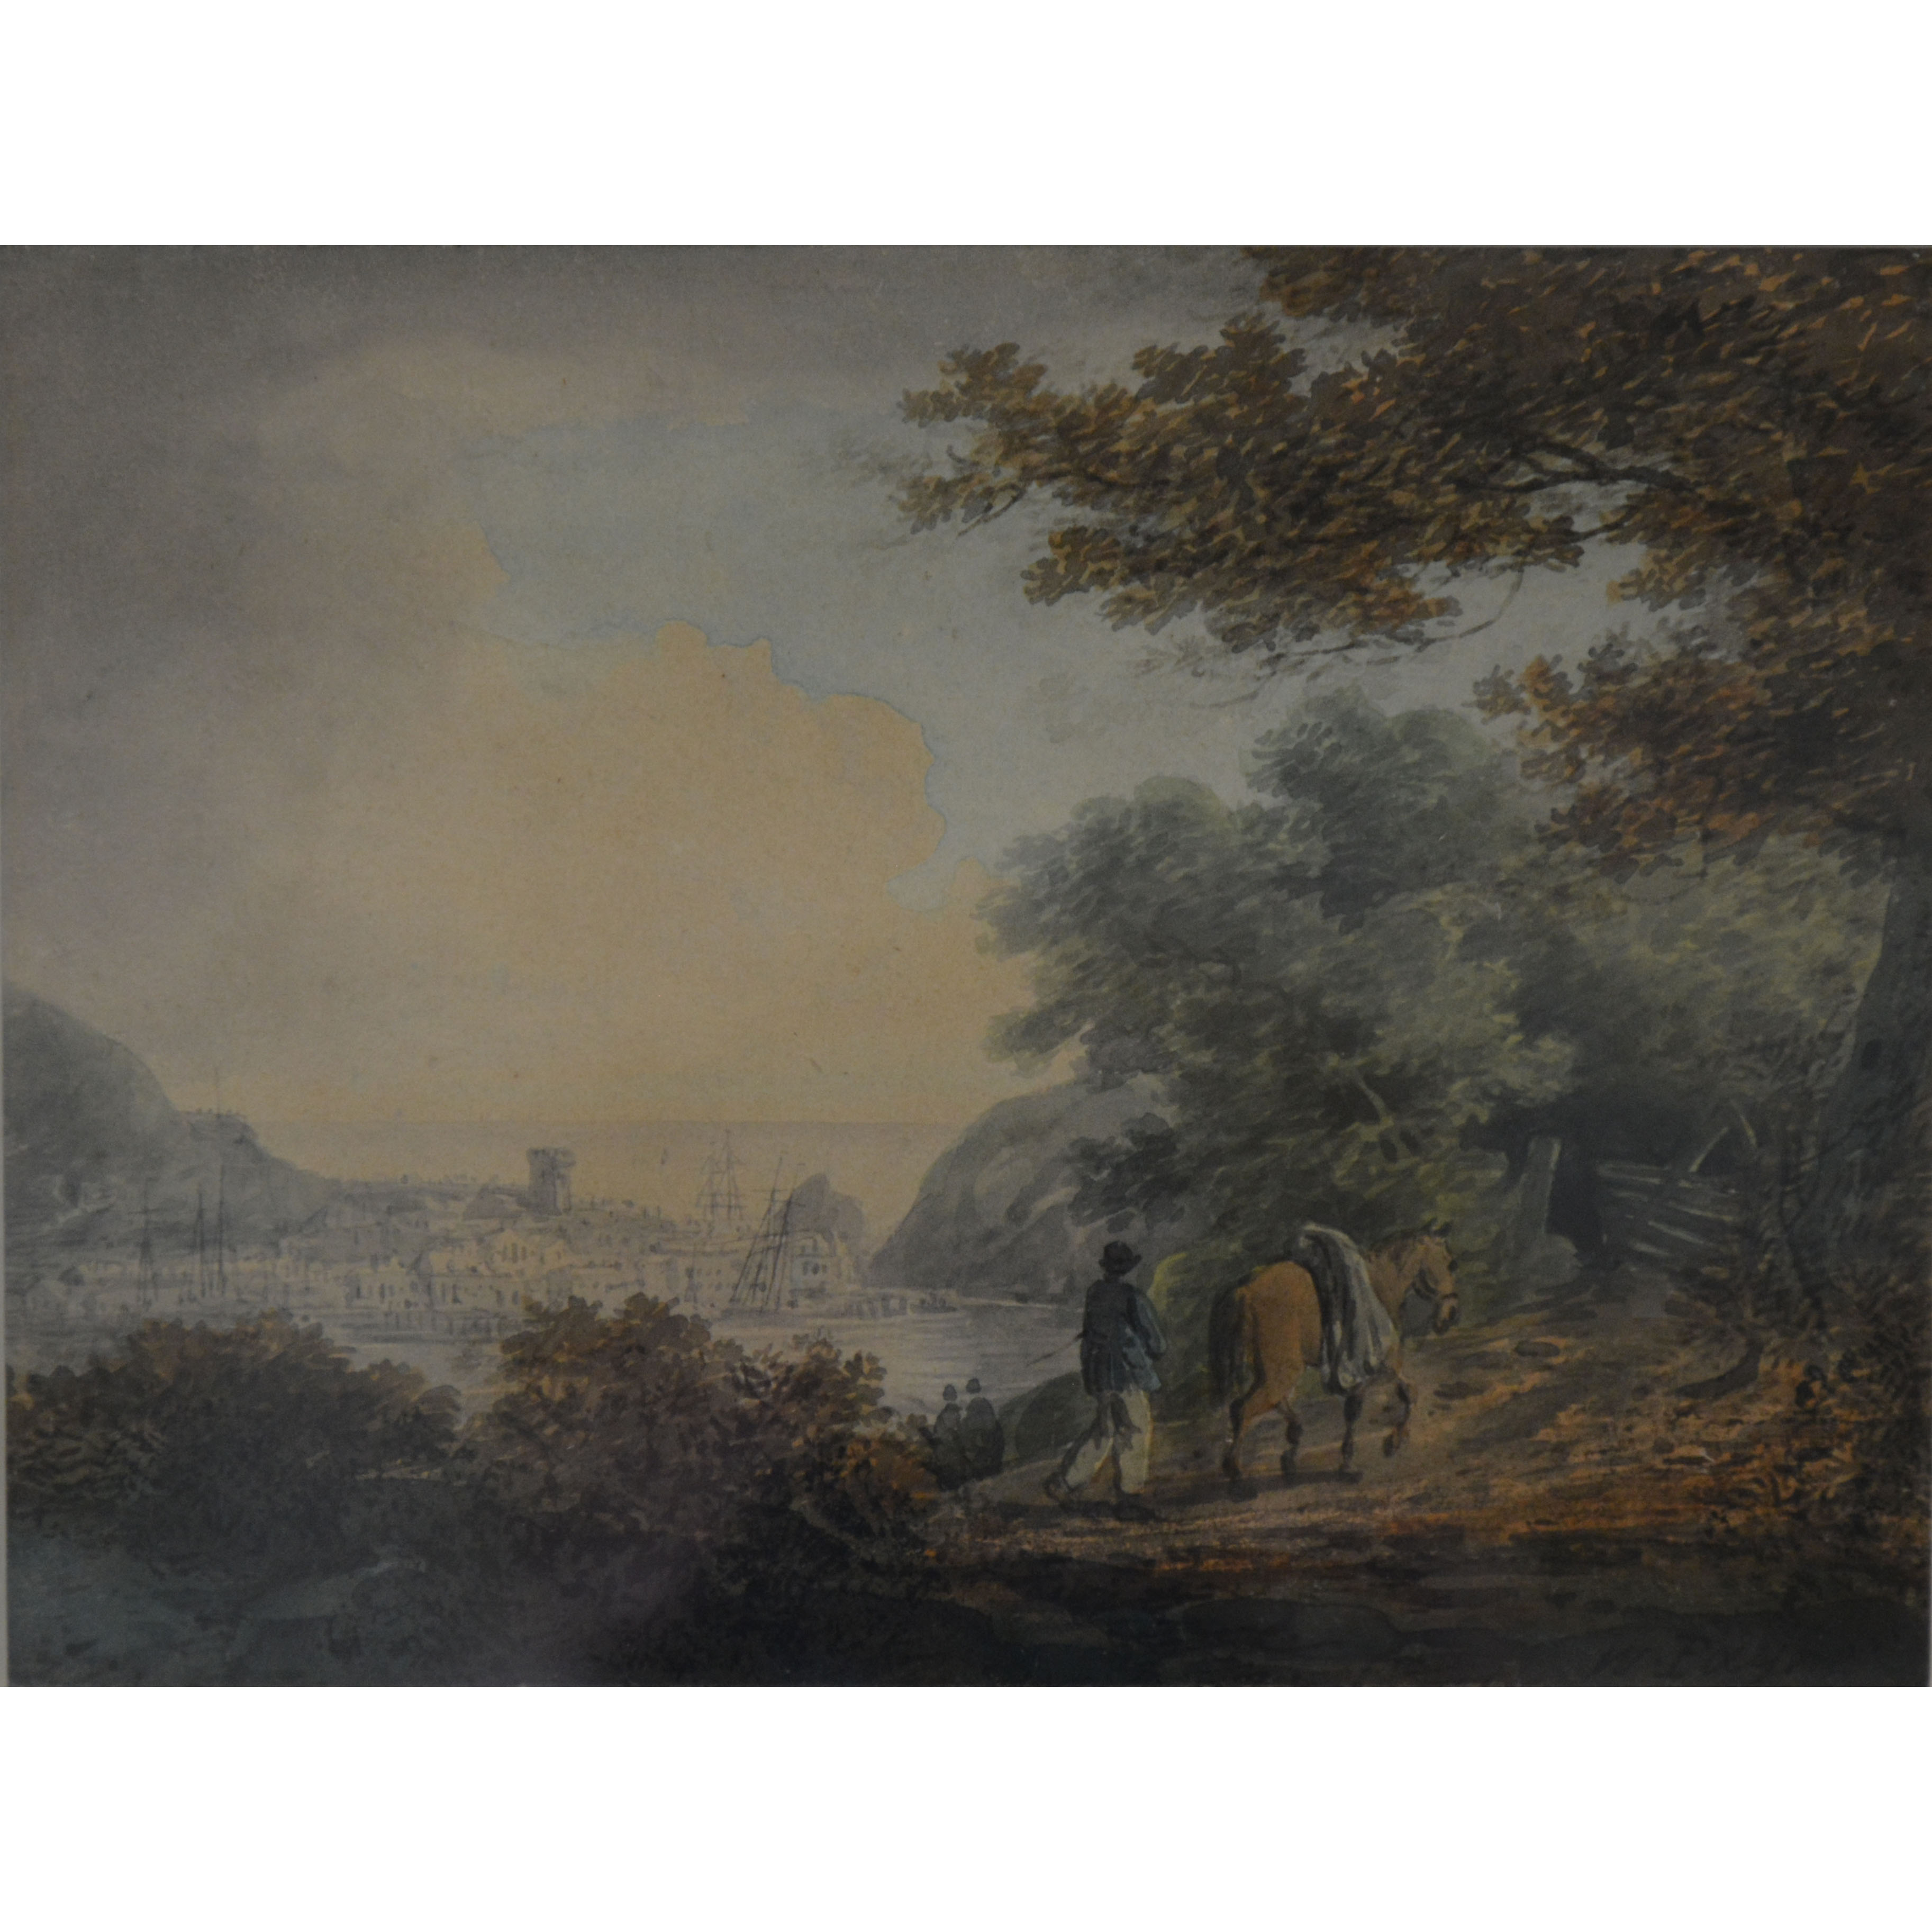 William Payne, East Looe, in Cornwall, inscribed and dated 1791, 13cm x 17cm.